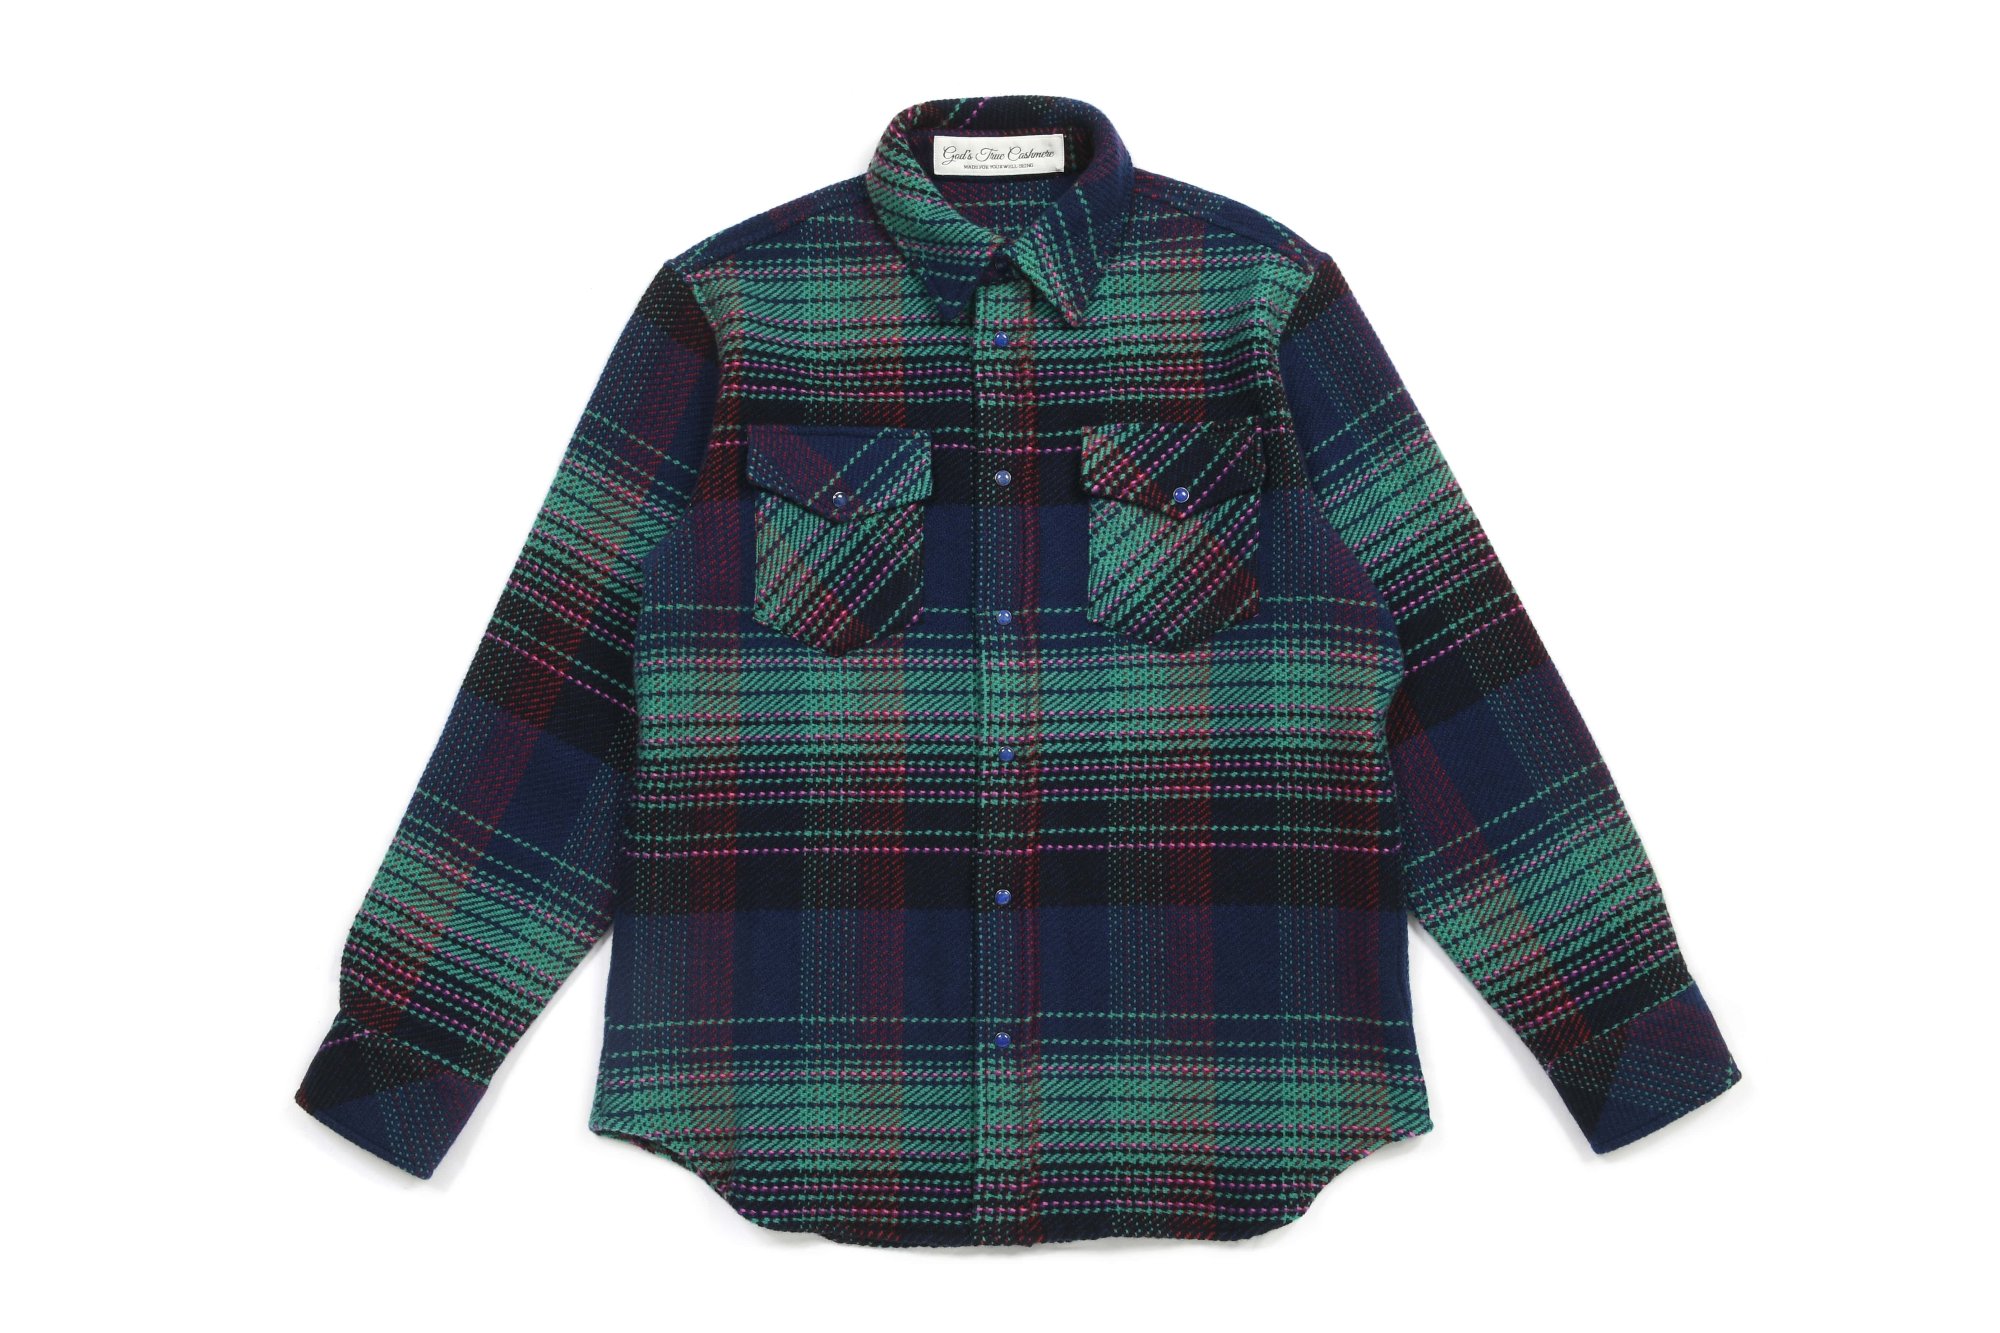 Brad Pitt’s gem-toting plaid shirts – with diamonds for buttons: the ...